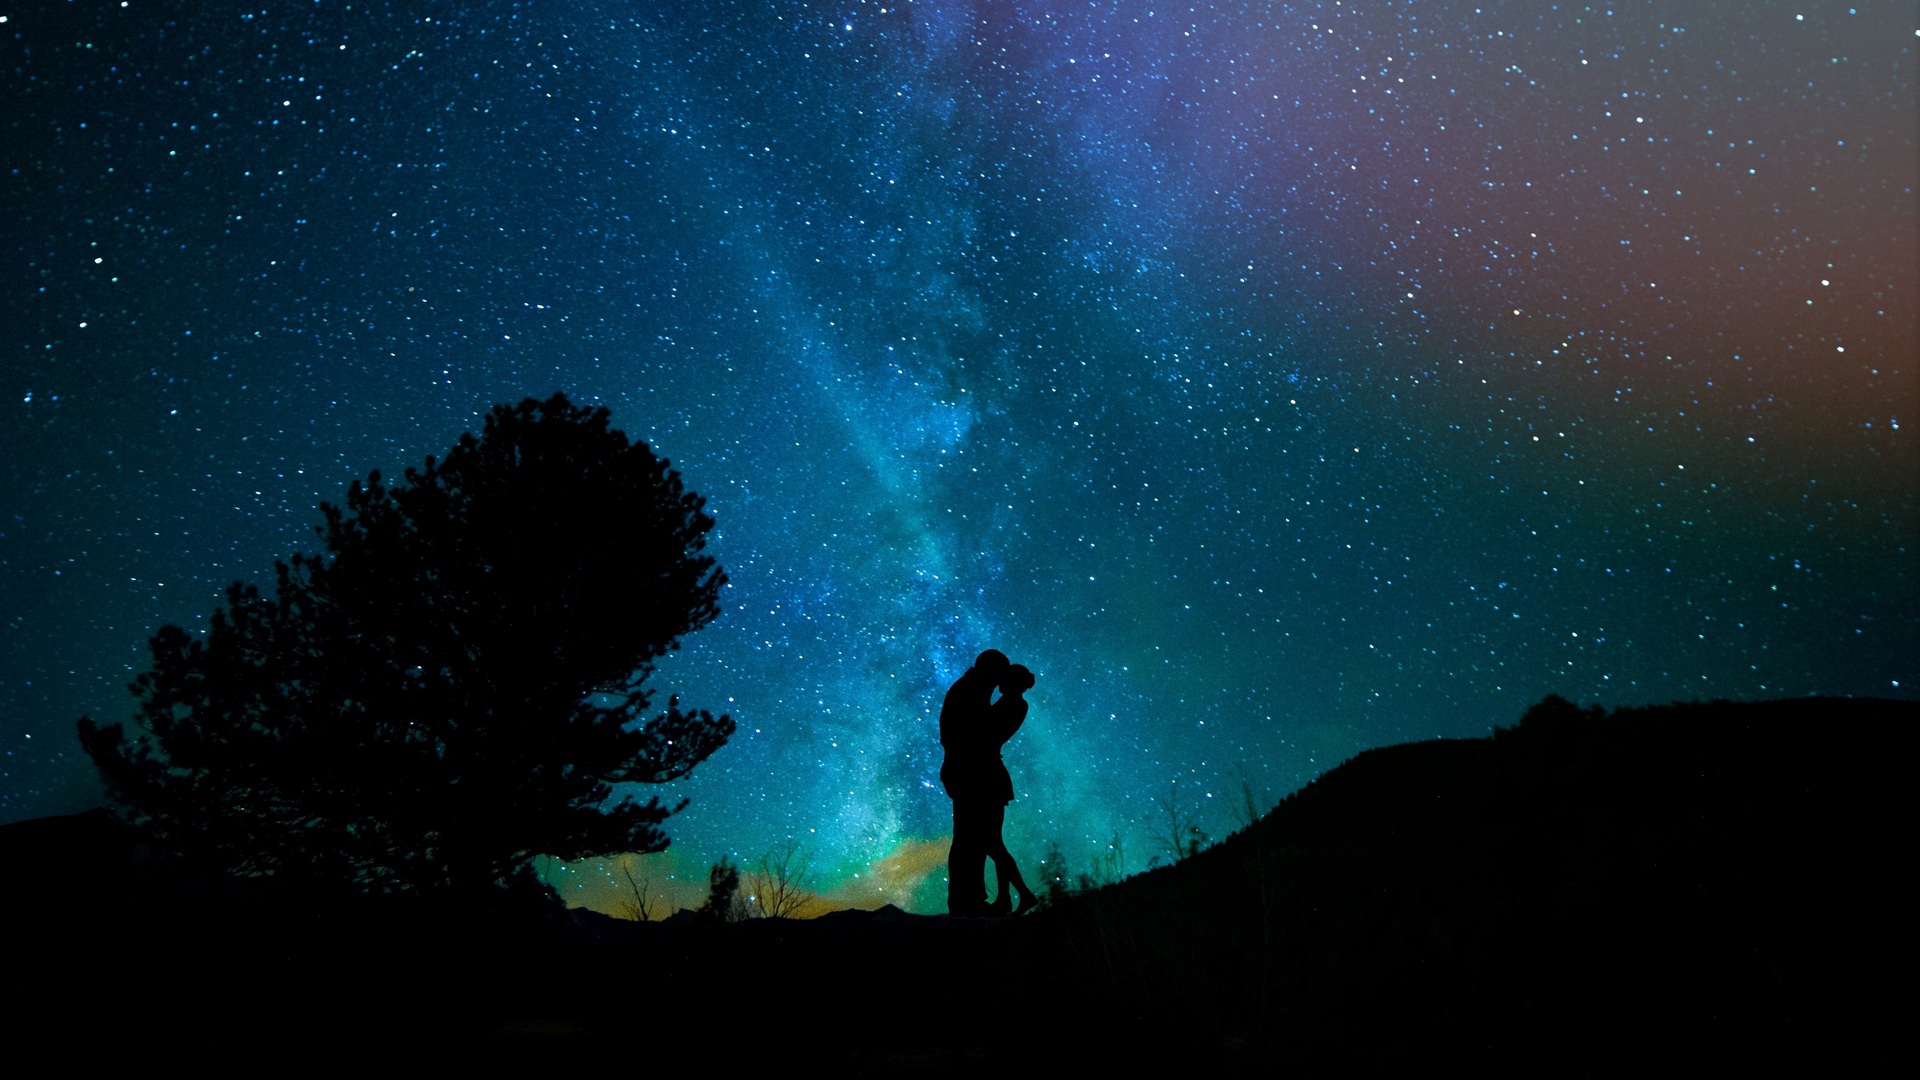 750 Starry Sky Pictures HD  Download Free Images on Unsplash